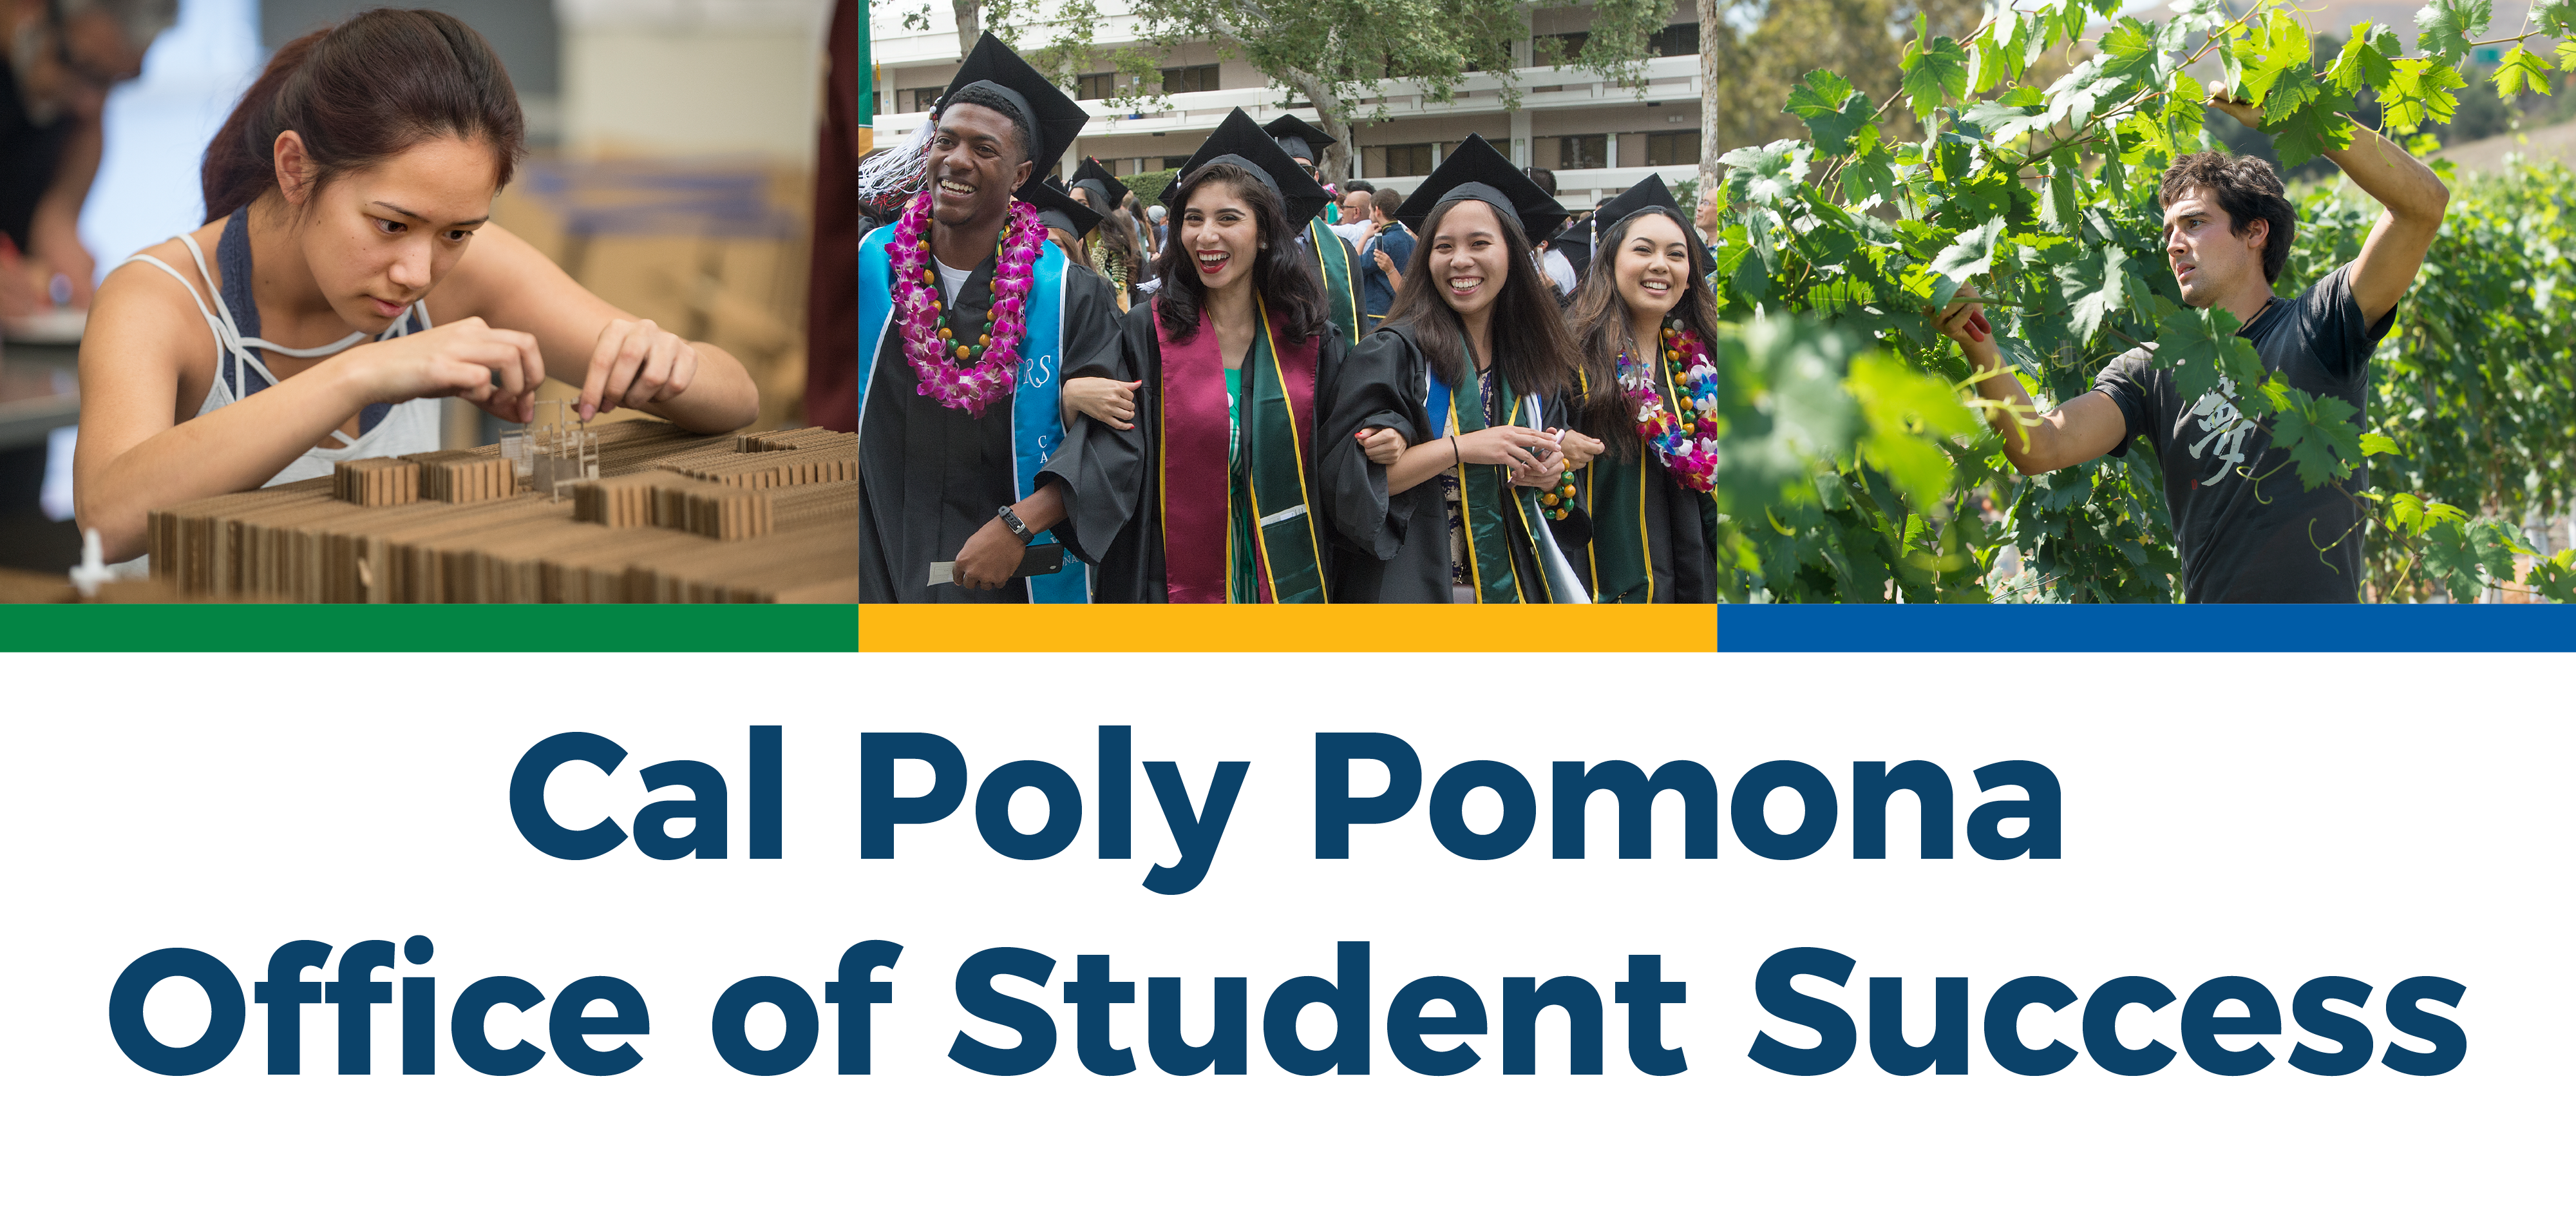 Cal Poly Pomona Office of Student Success